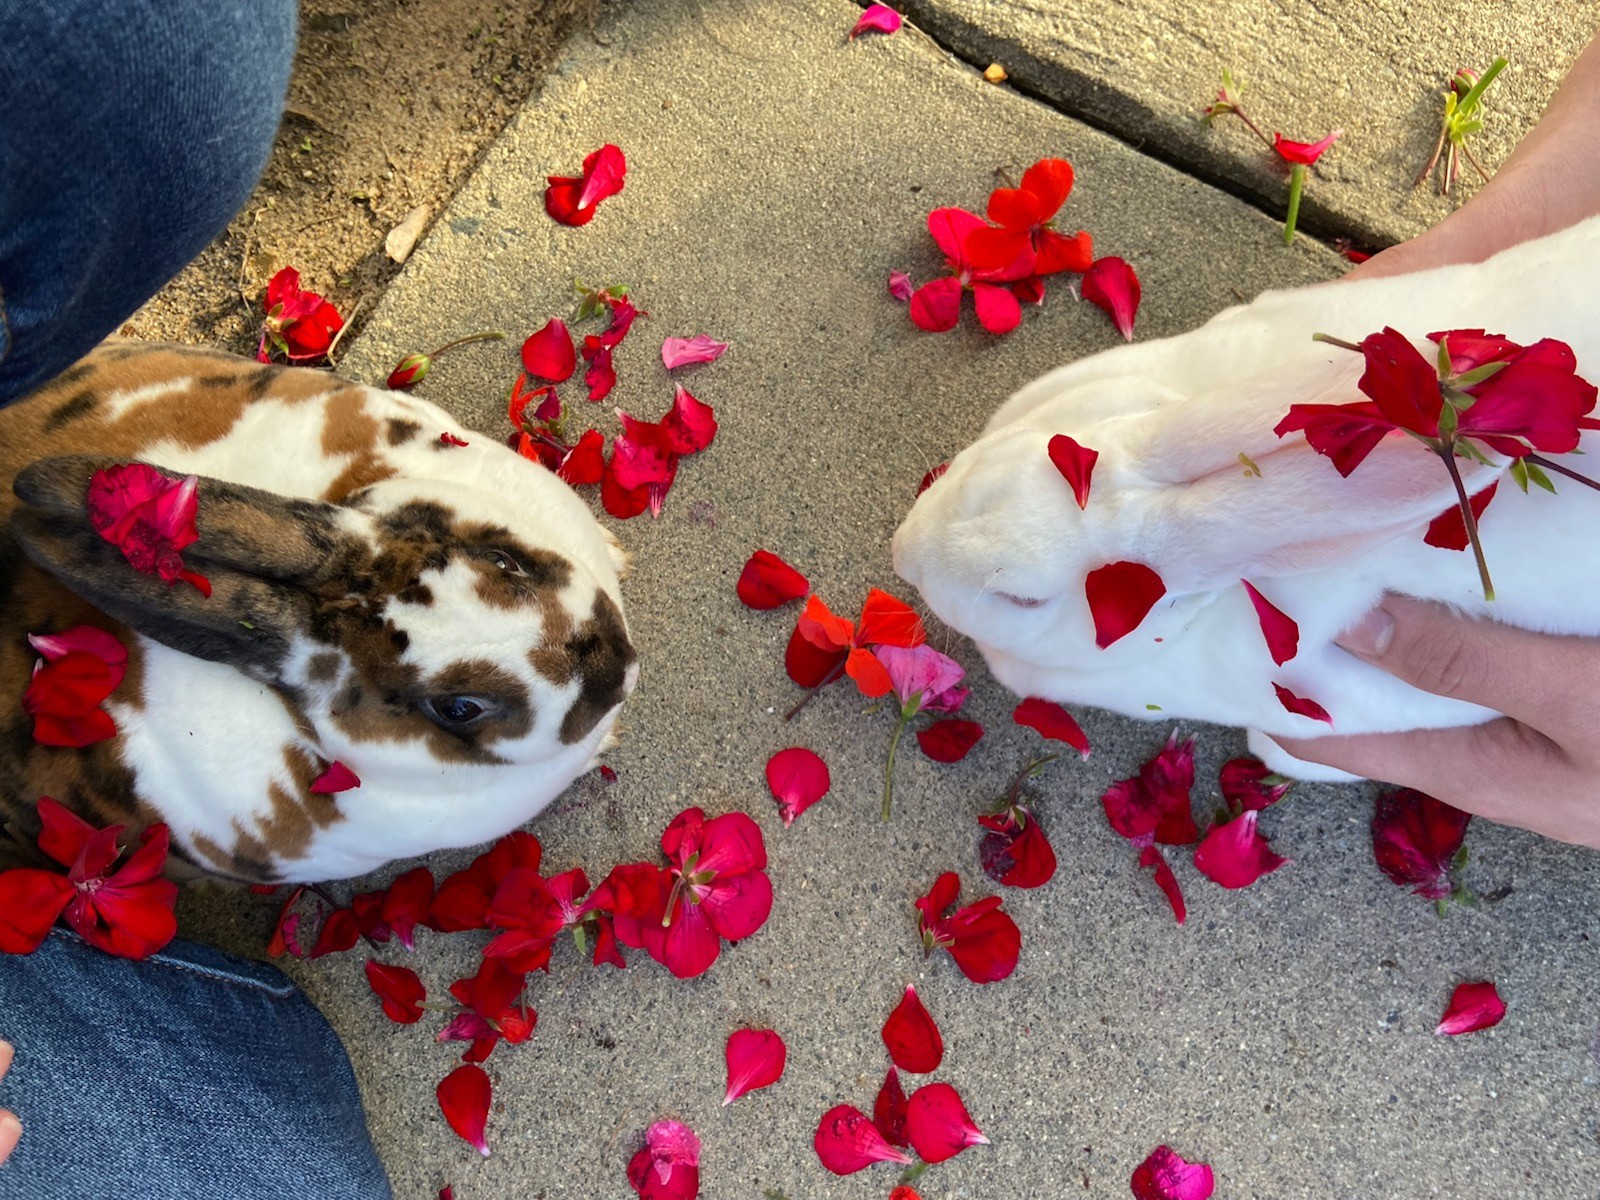 Two Rabbits look at each other with red flowers strewn around them on the sidewalk